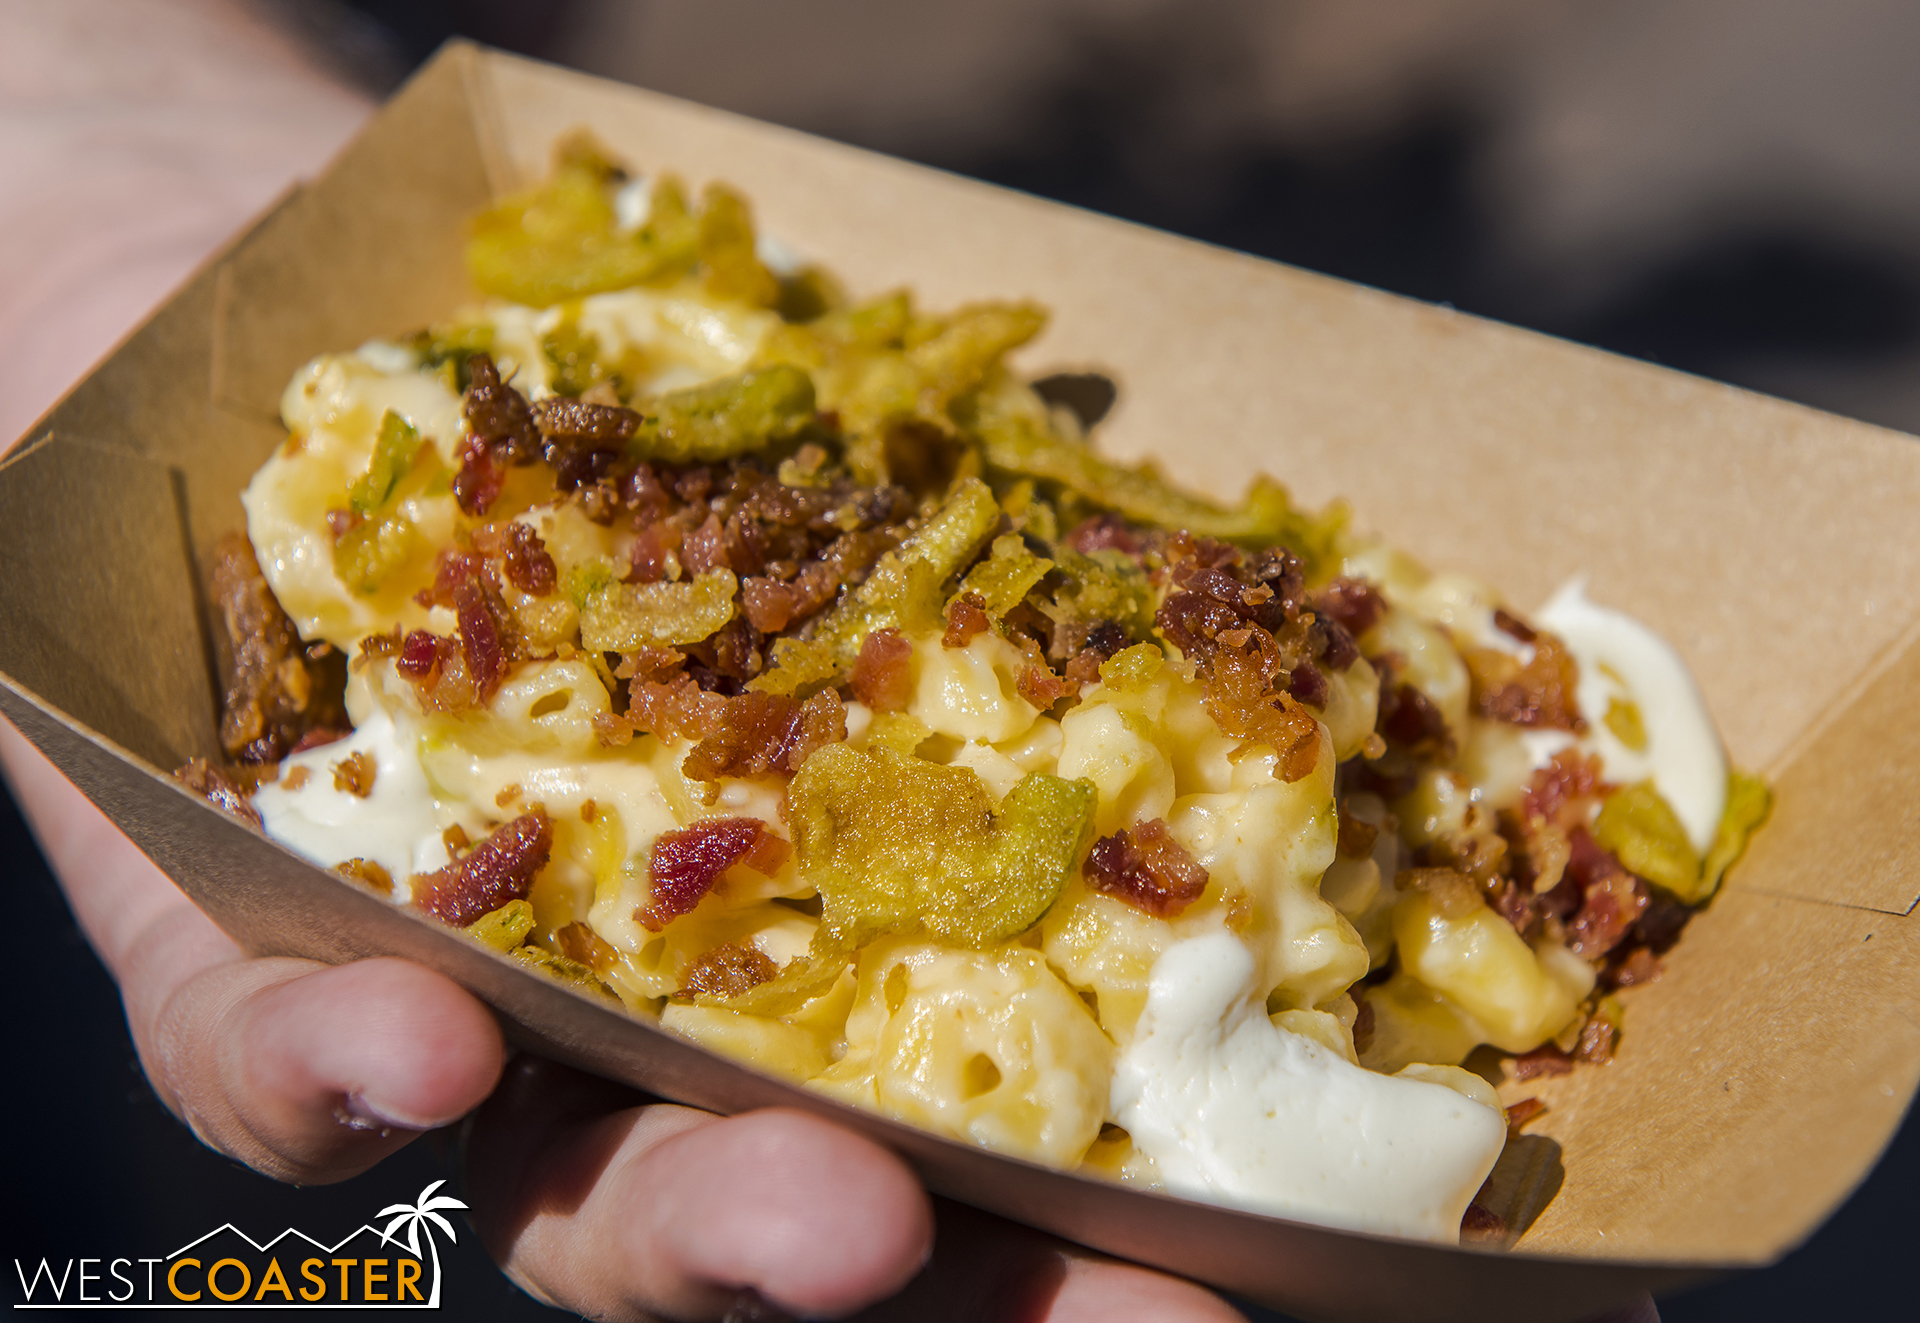  Jalapeño Popper Mac 'n' Cheese with Bacon @ Peppers Cali-Ente  Savory, hearty, with a small pop of spice. This is creamy goodness and much better than their Bacon Mac 'n' Cheese from last year but not as good as the OMG-wow French Onion Mac 'n' Chee